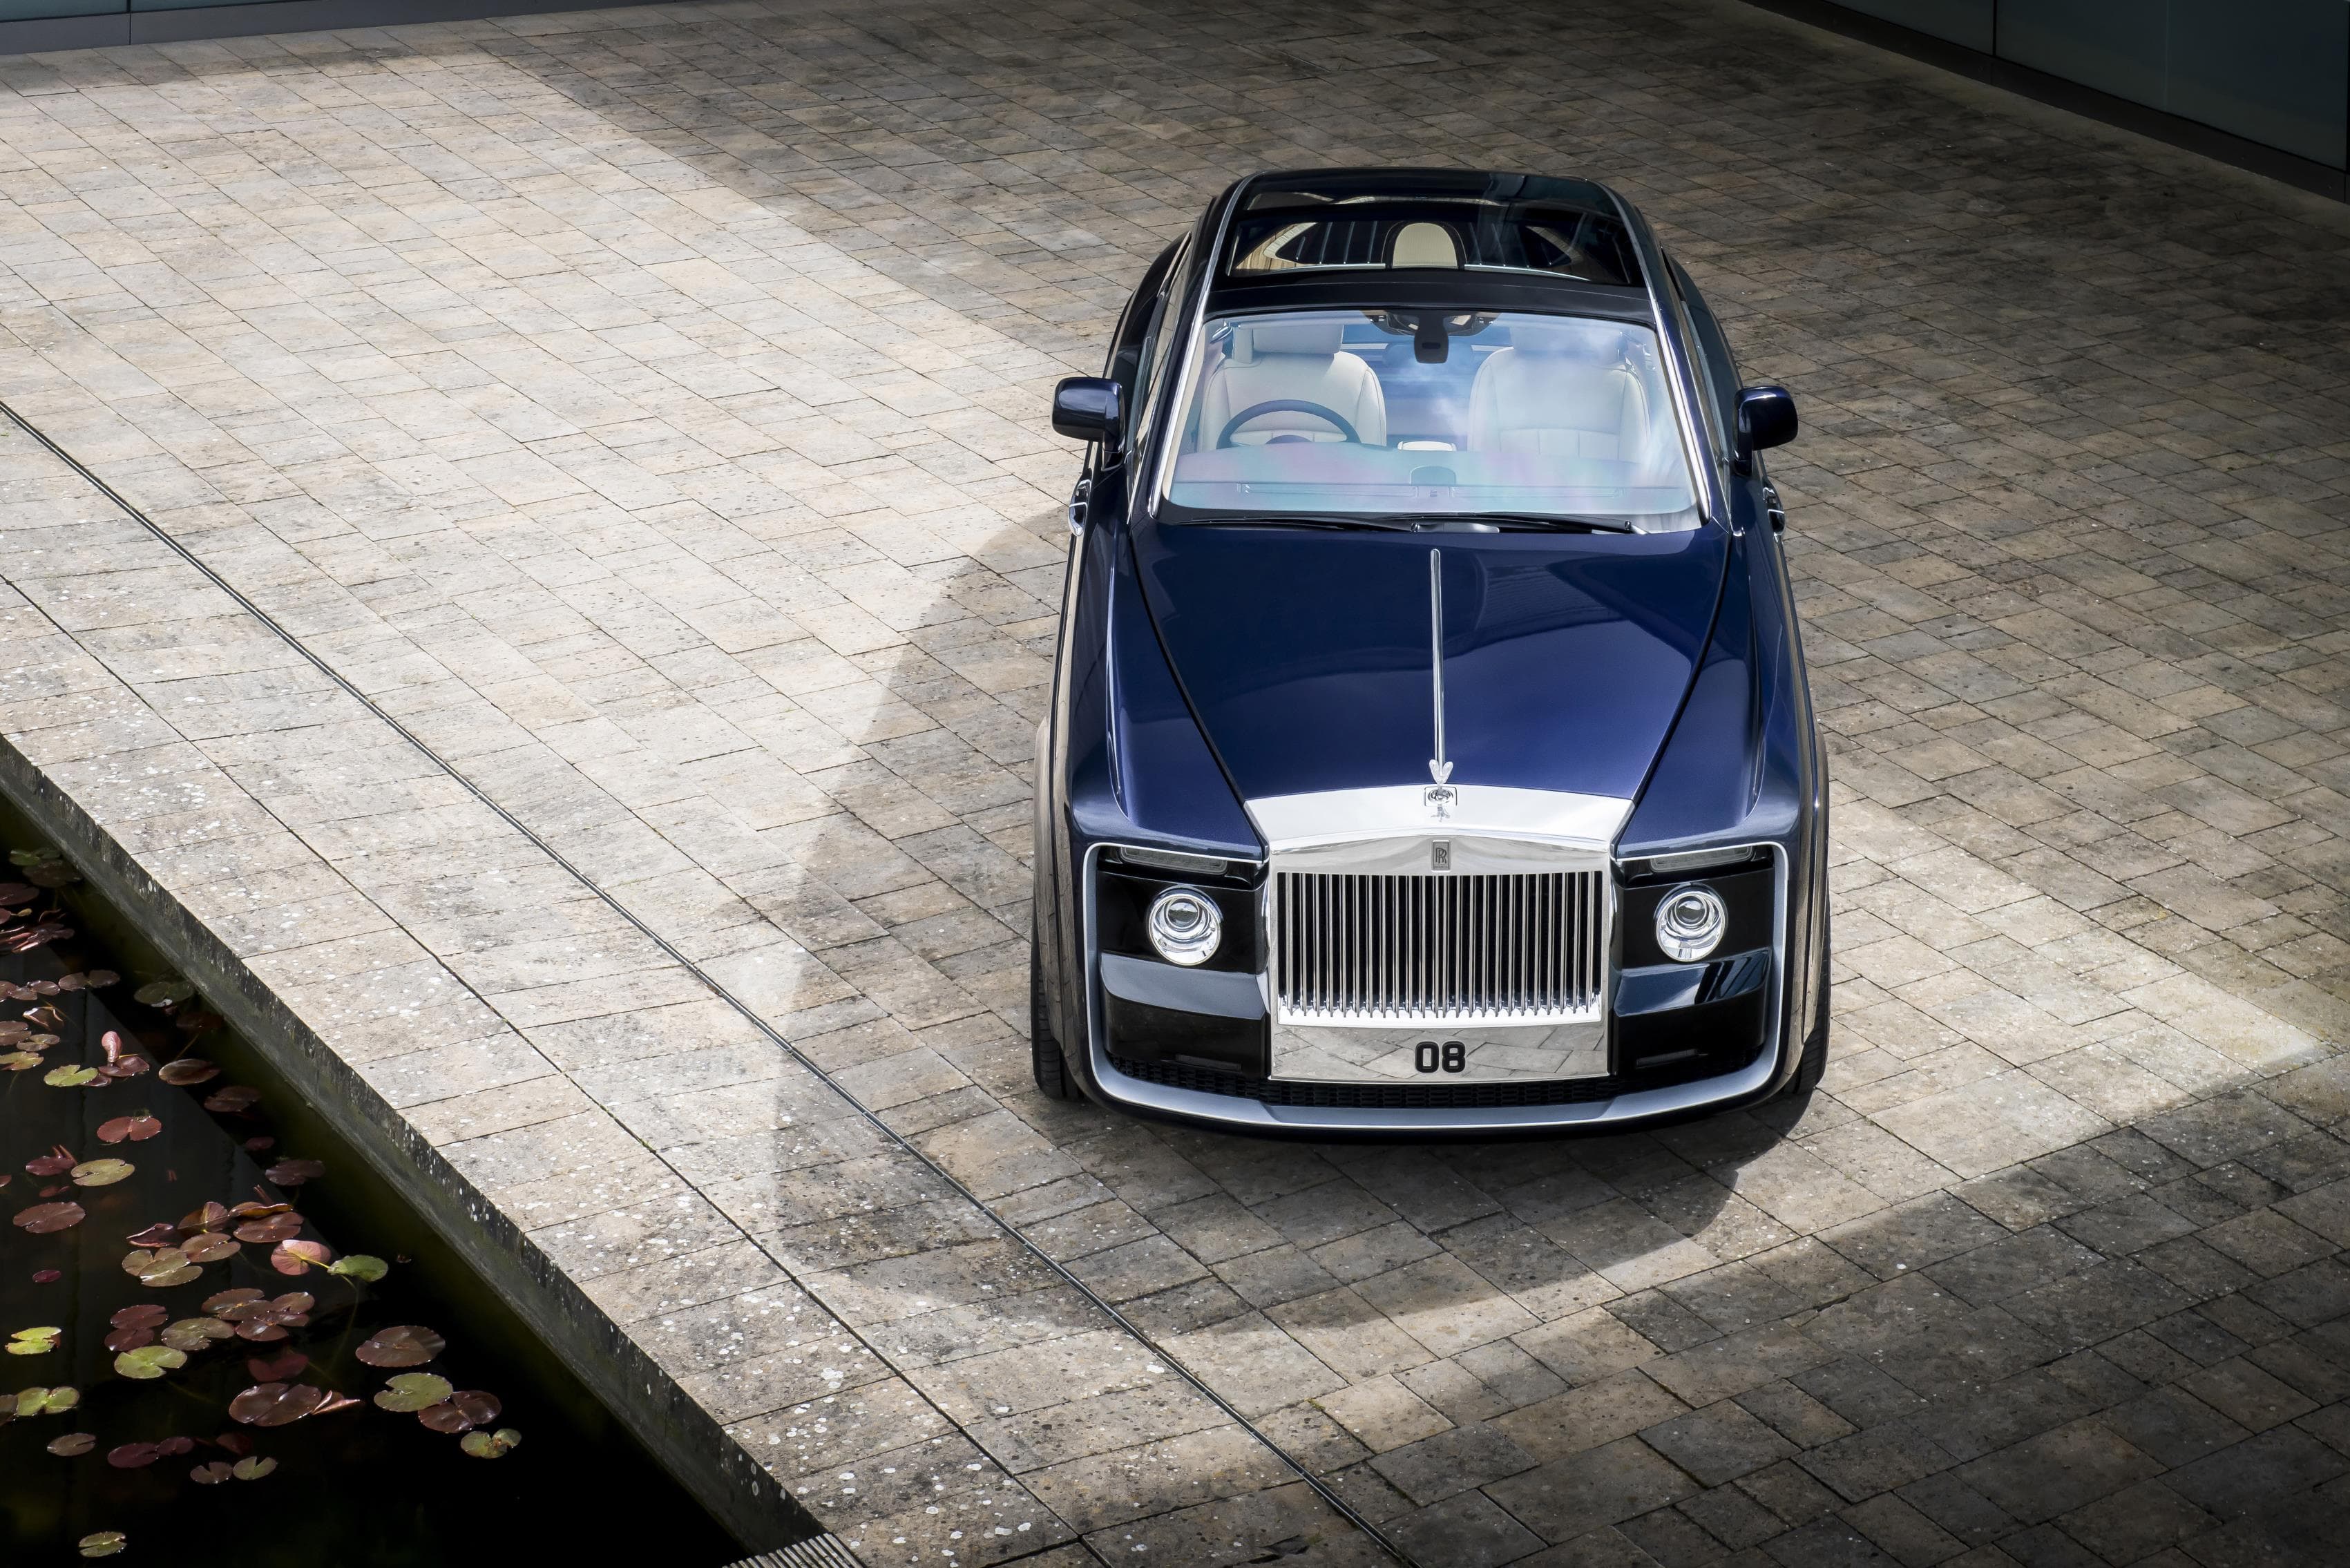 $13 Million Rolls-Royce Sweptail Could Be Most Expensive New Car Ever Made